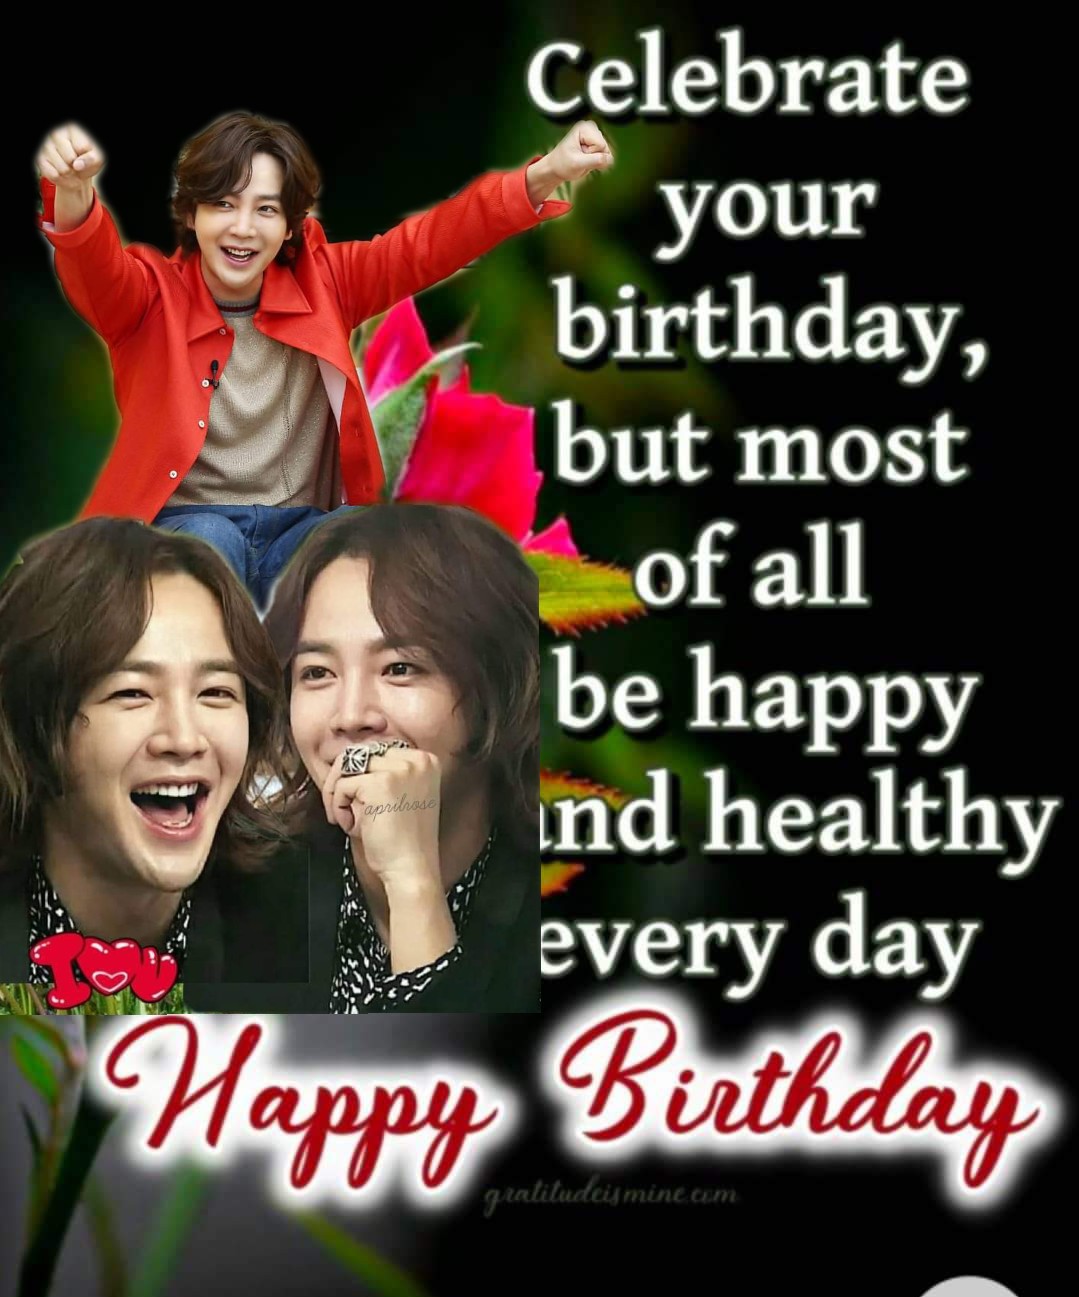 Happy happy birthday my 
Prince Jang Keun Suk 
Wishing you all the best in life always healthy and be safe... 